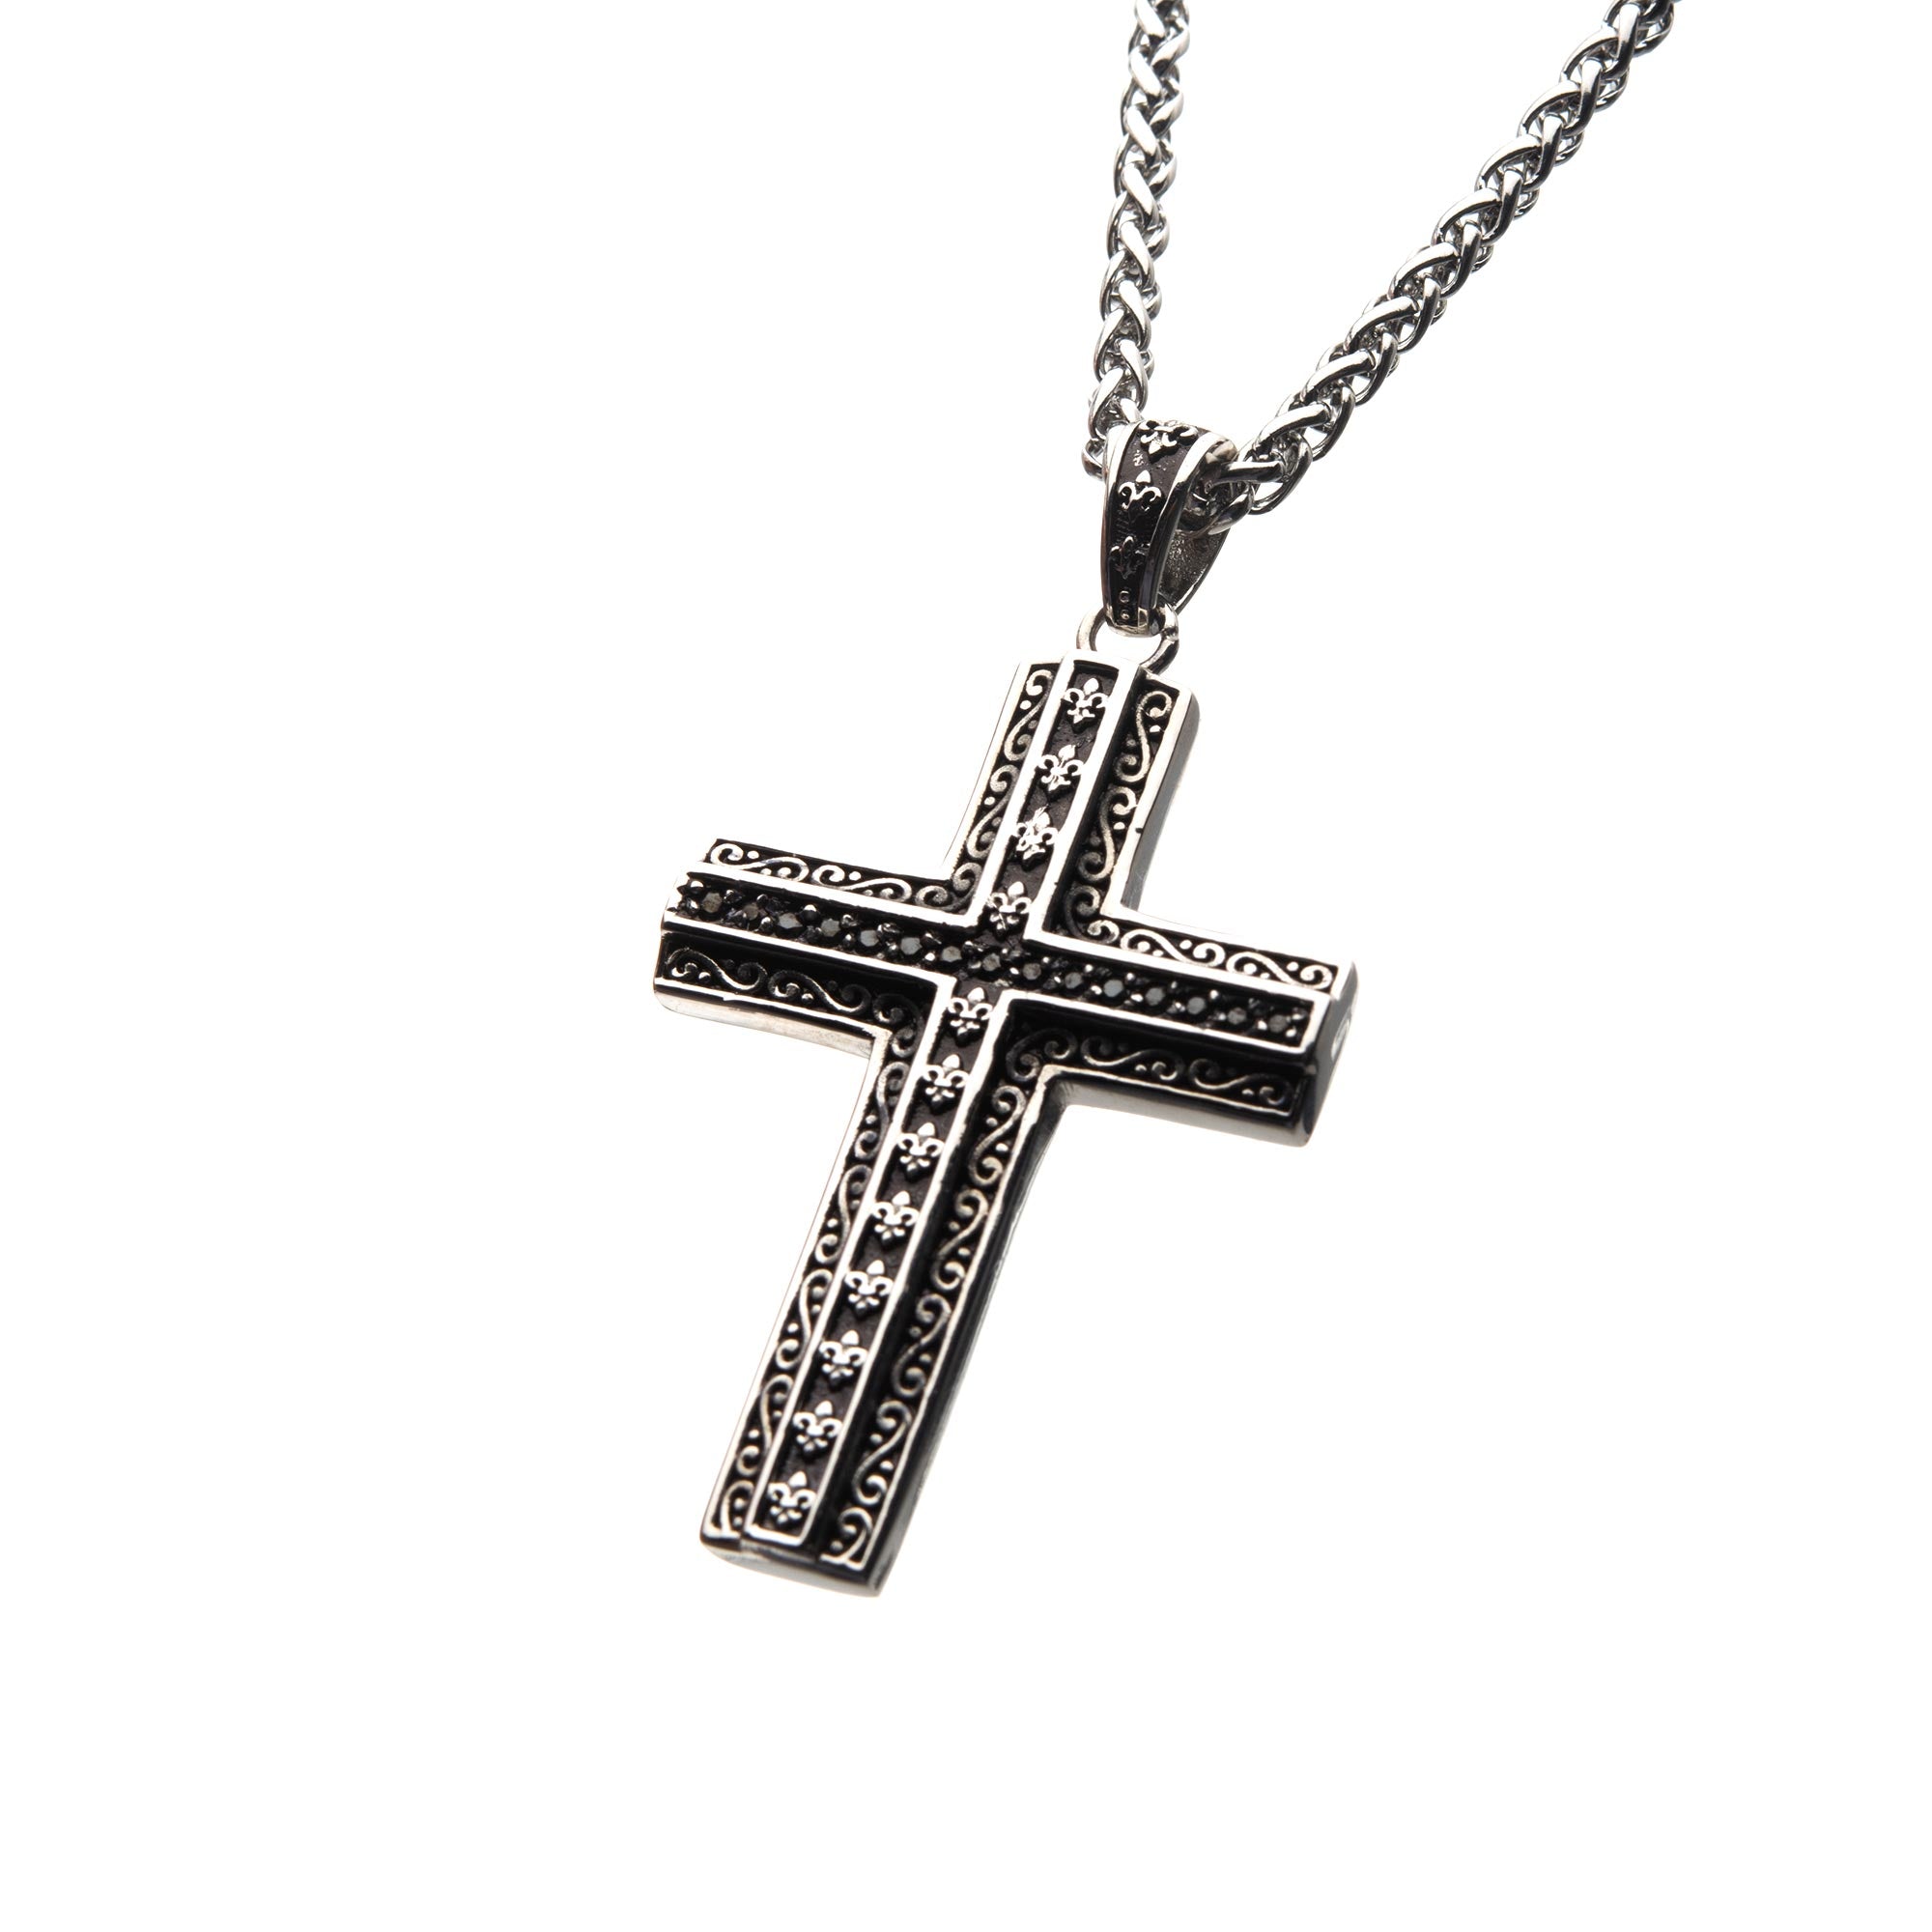 Black Oxidized Steel Cross with Black CZs Pendant with Steel Wheat Chain